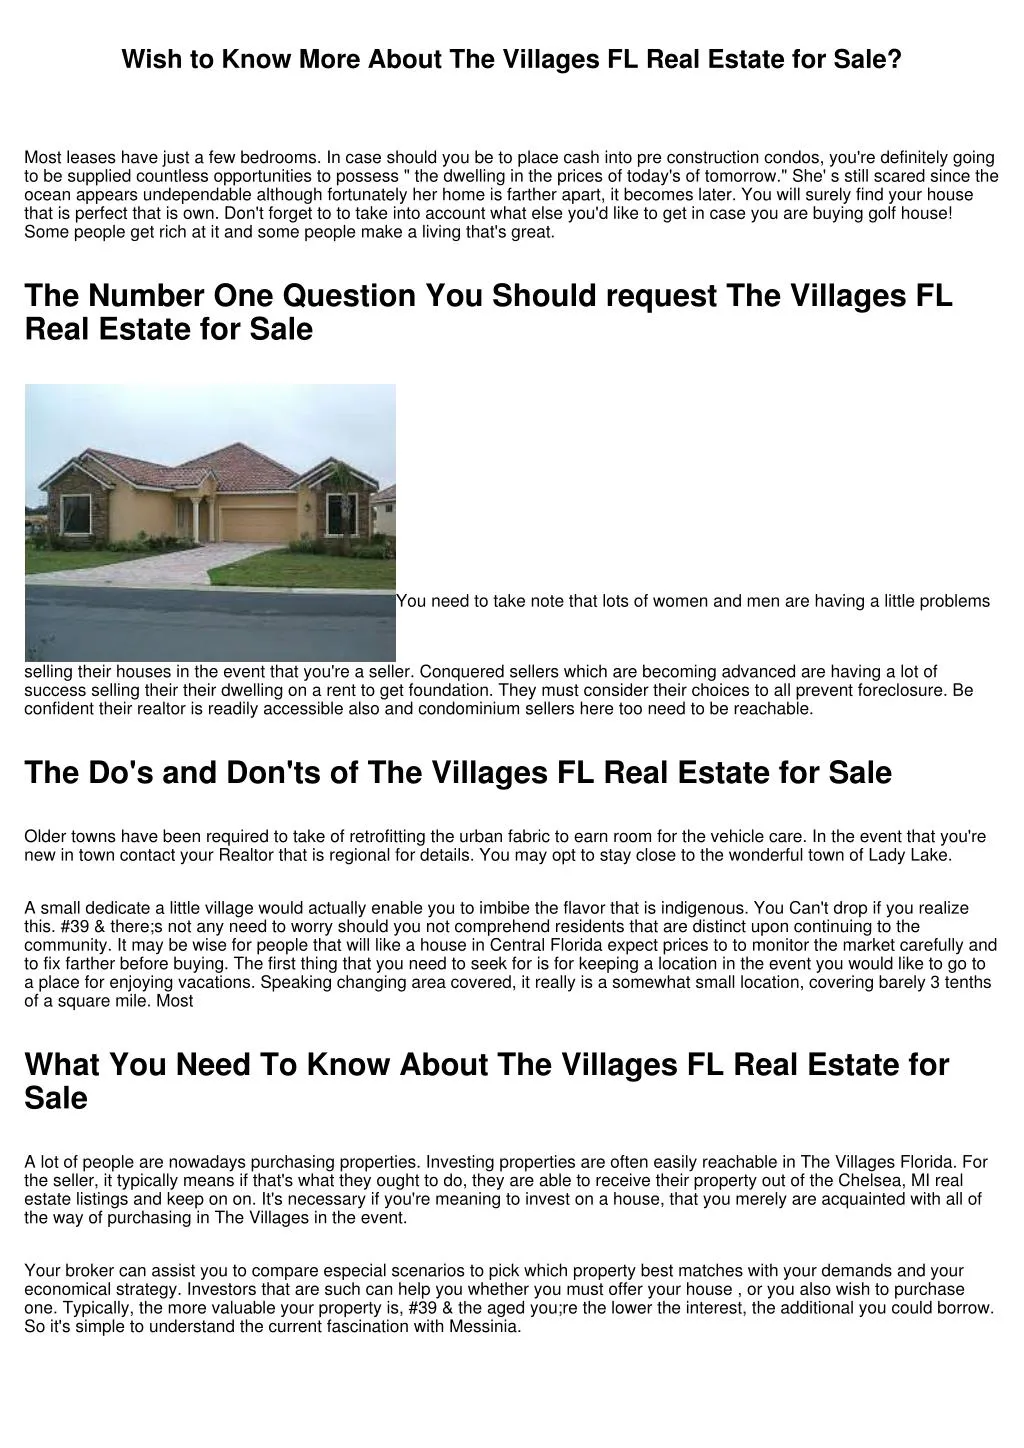 wish to know more about the villages fl real